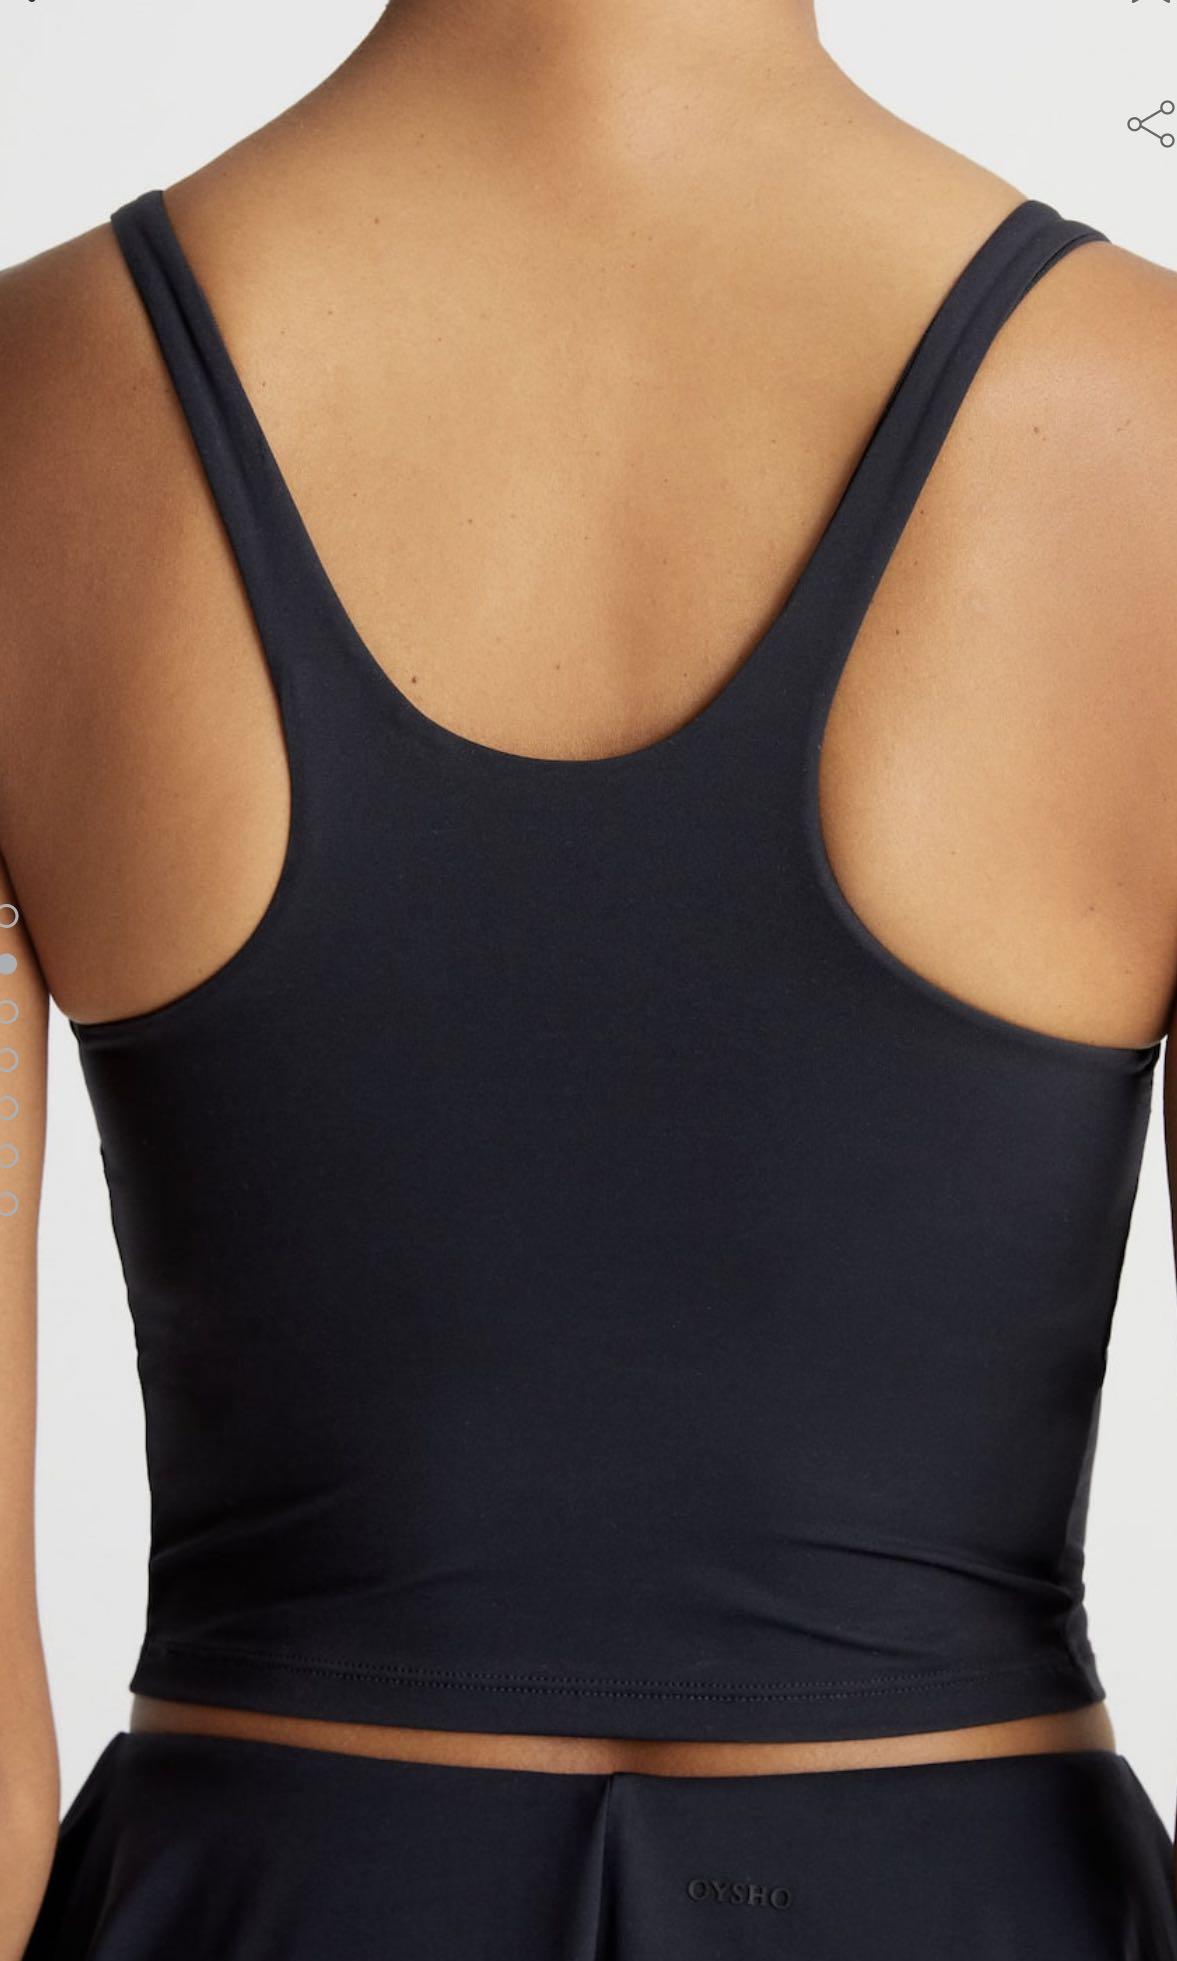 Oysho Light touch vest top with cups, Women's Fashion, Activewear on  Carousell